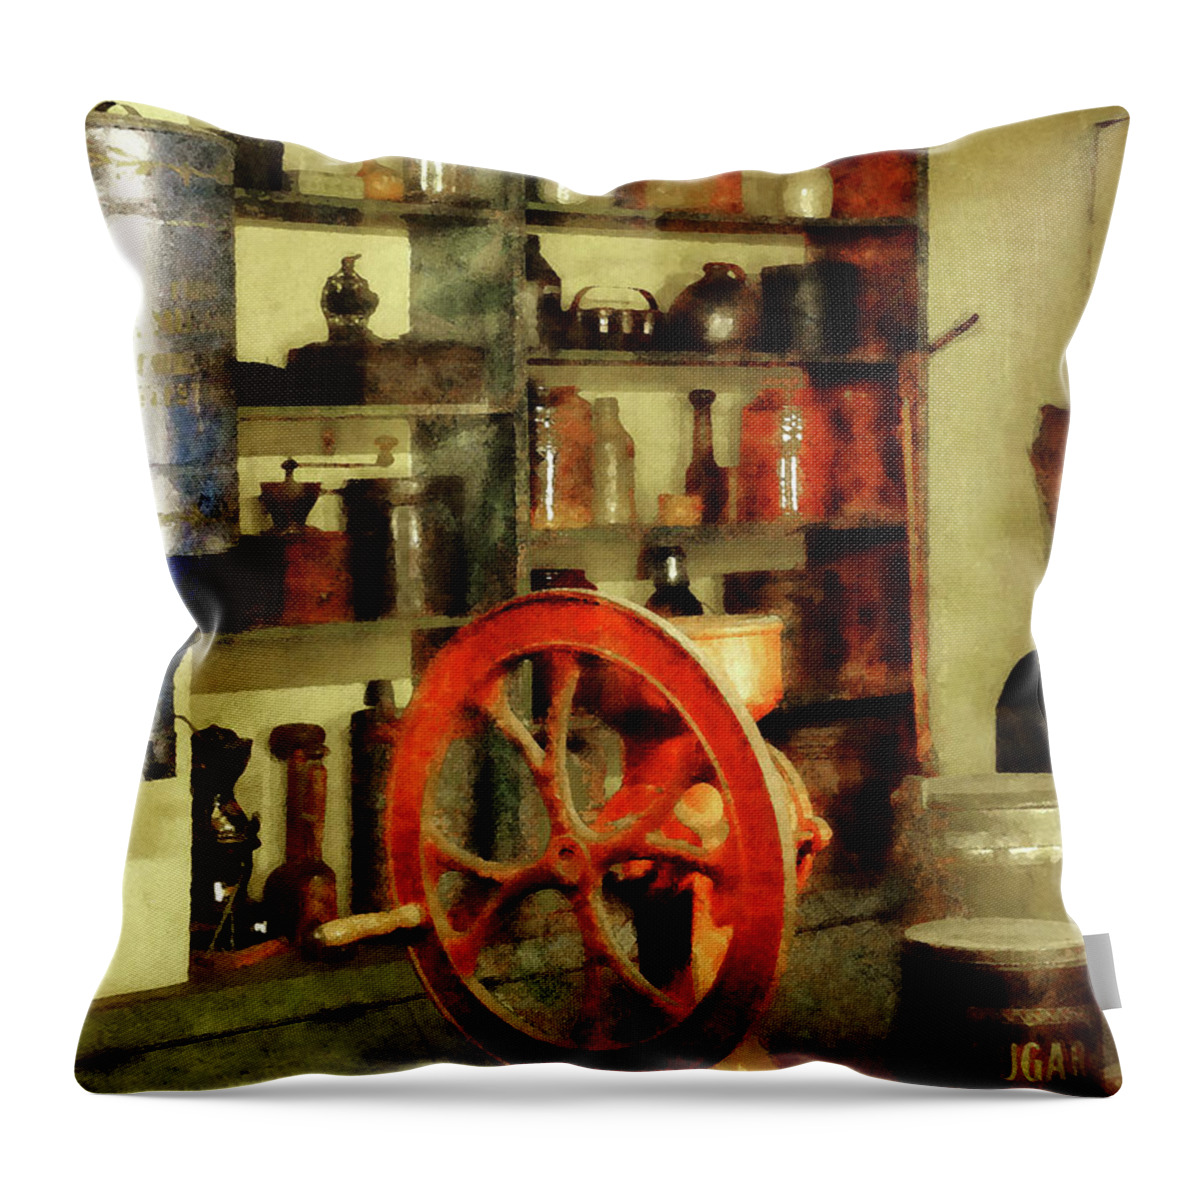 Coffee Grinder Throw Pillow featuring the photograph Coffee Grinder And Canister Of Sugar by Susan Savad